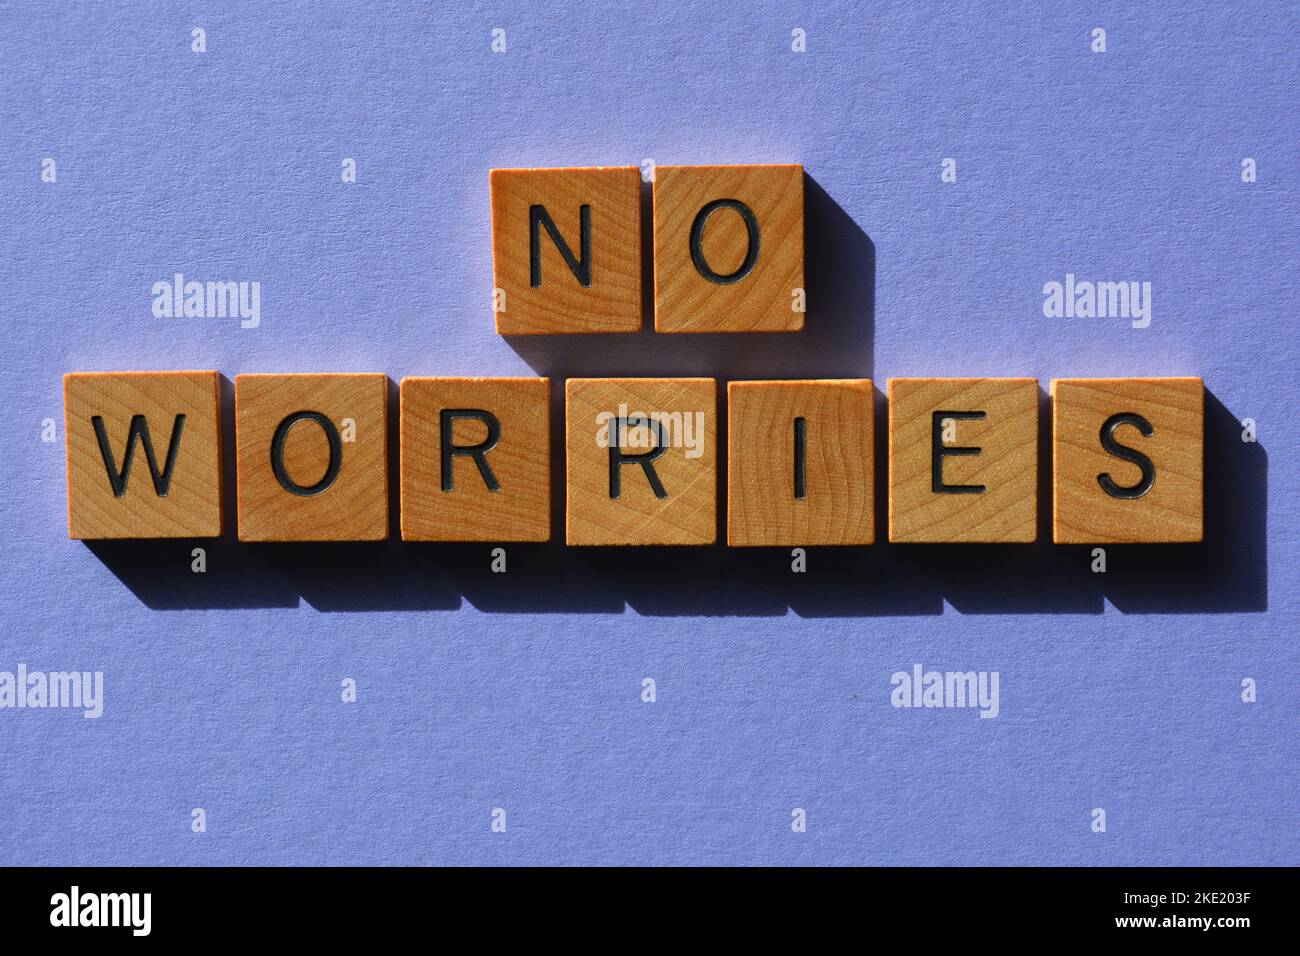 No Worries, Australian slang words meaning No Problem in wooden alphabet letters isolated on purple background Stock Photo